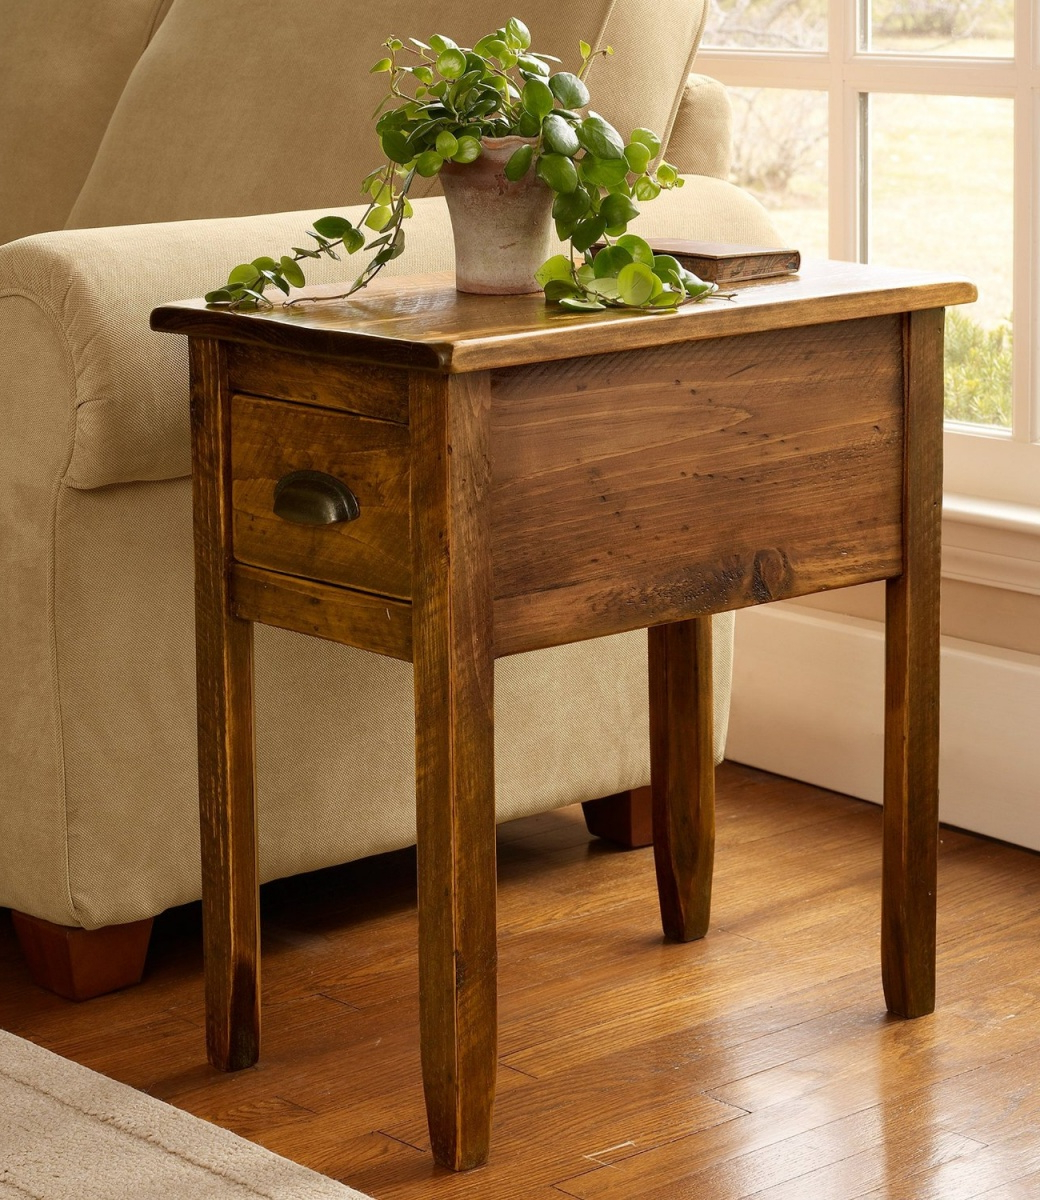 Side Tables for Living Room Ideas for Small Spaces | Roy ...